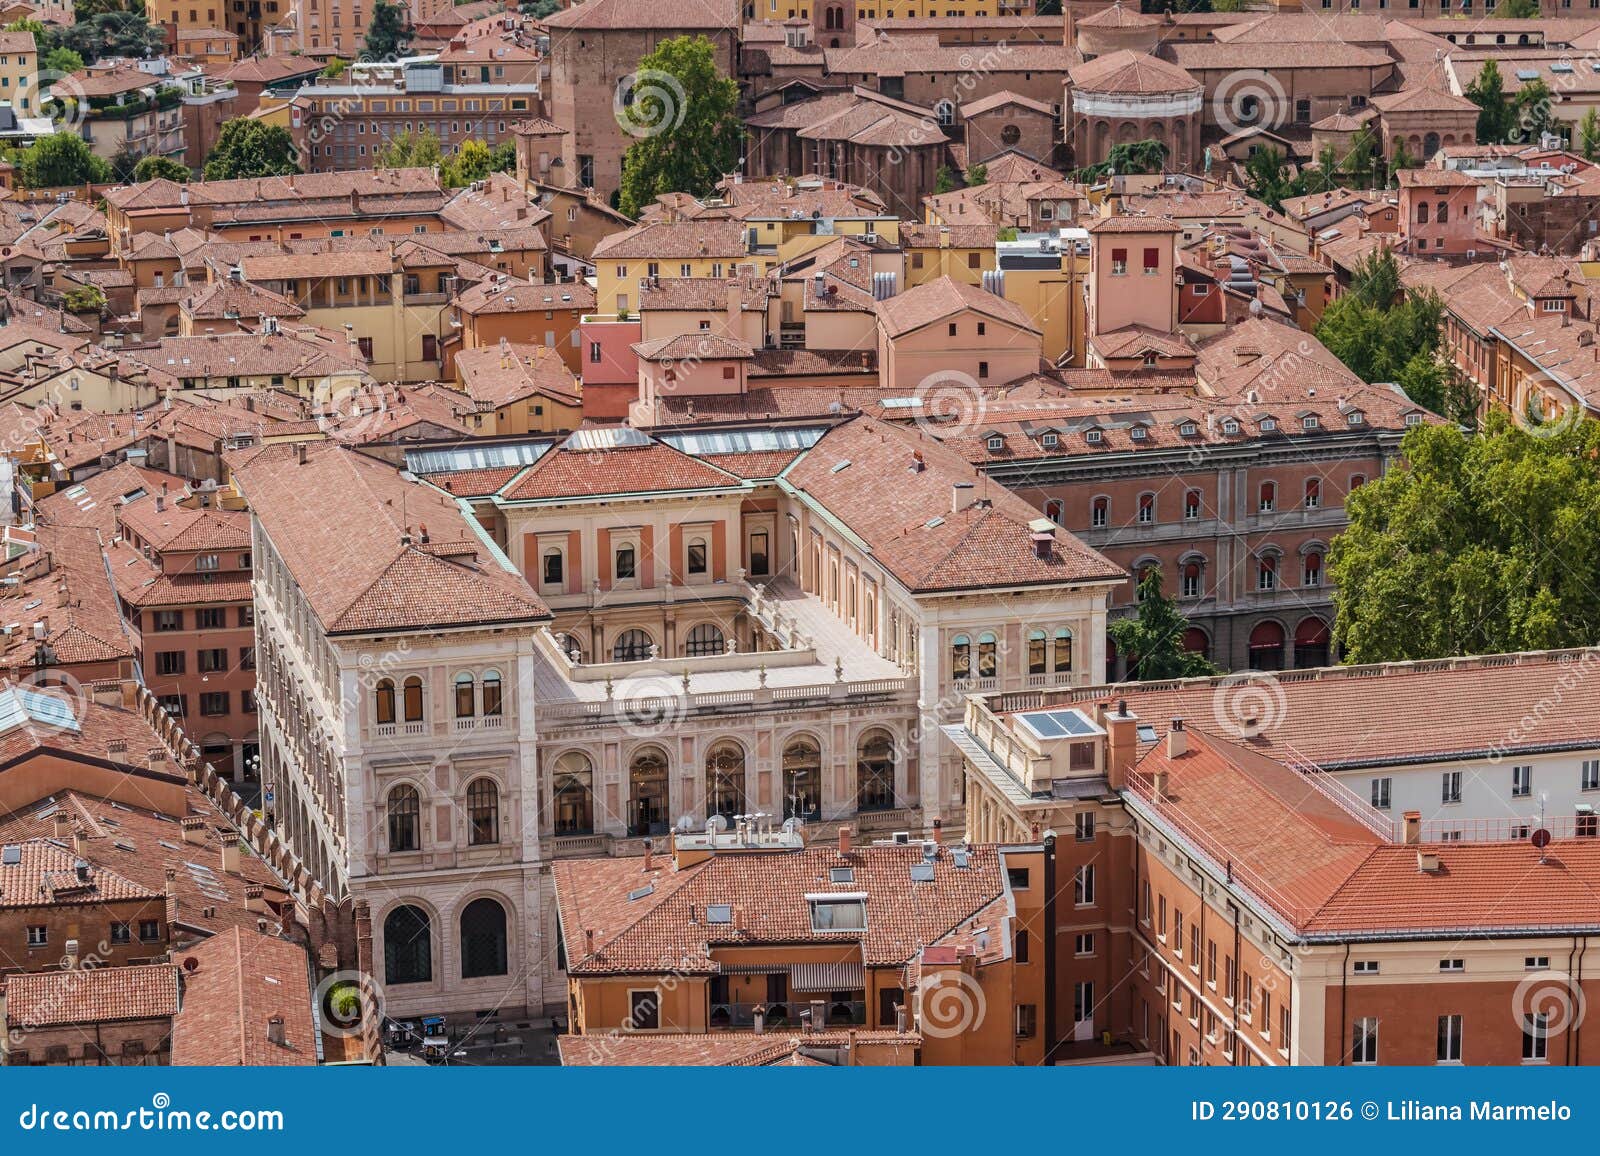 facade in aerial view of cassa di risparmio palace with basilica in background, bologna italy